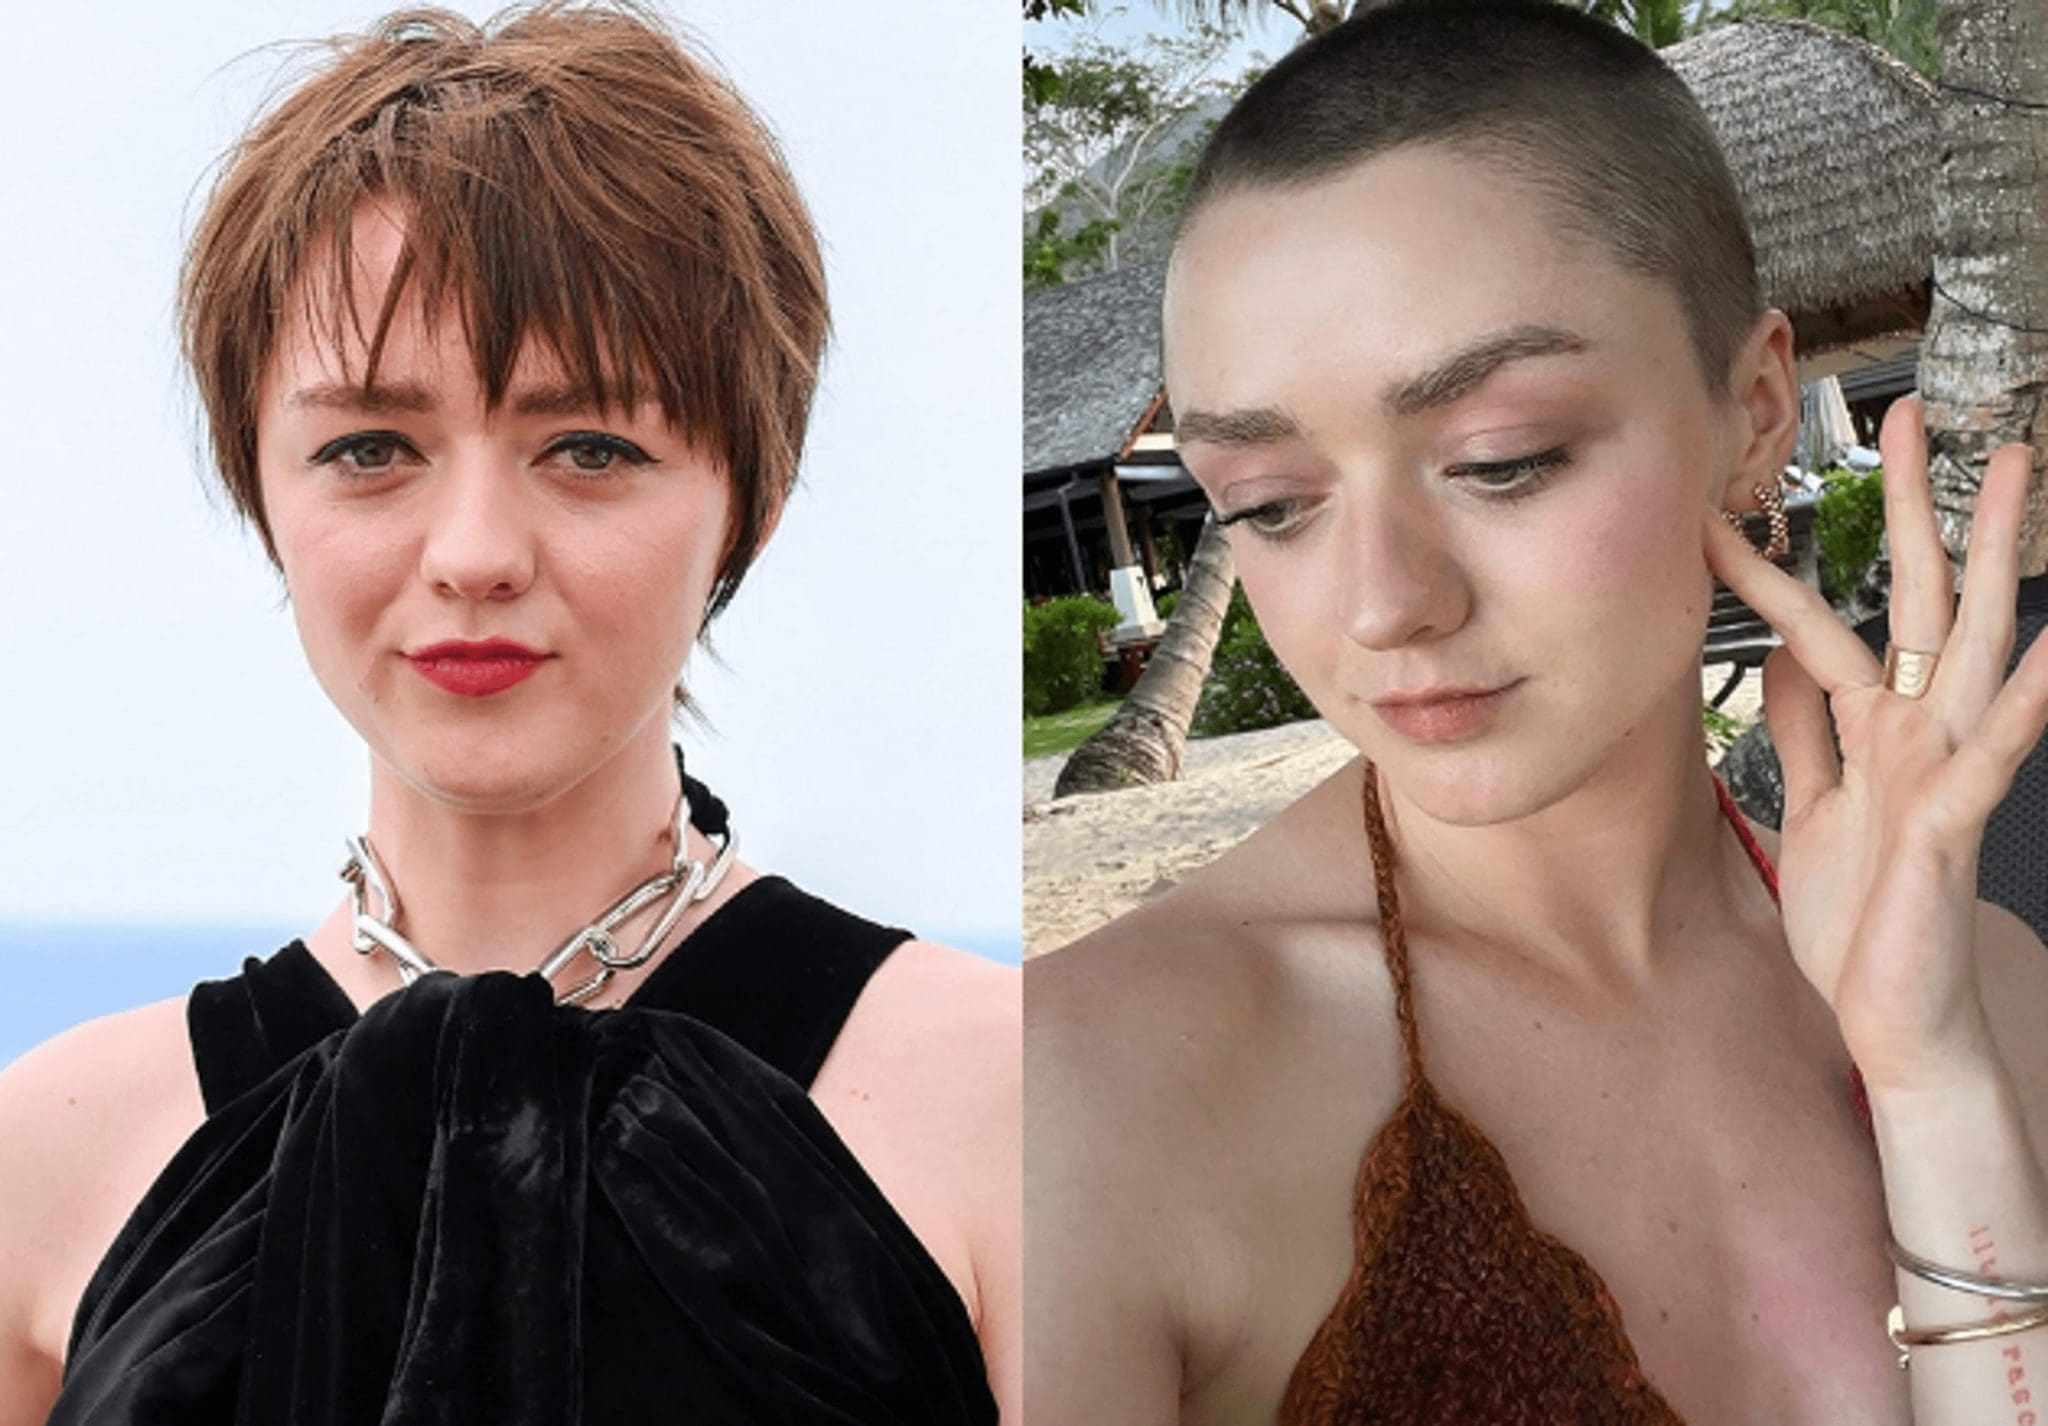 Maisie Williams Debuted A Brand-New, Extremely Short Hairdo